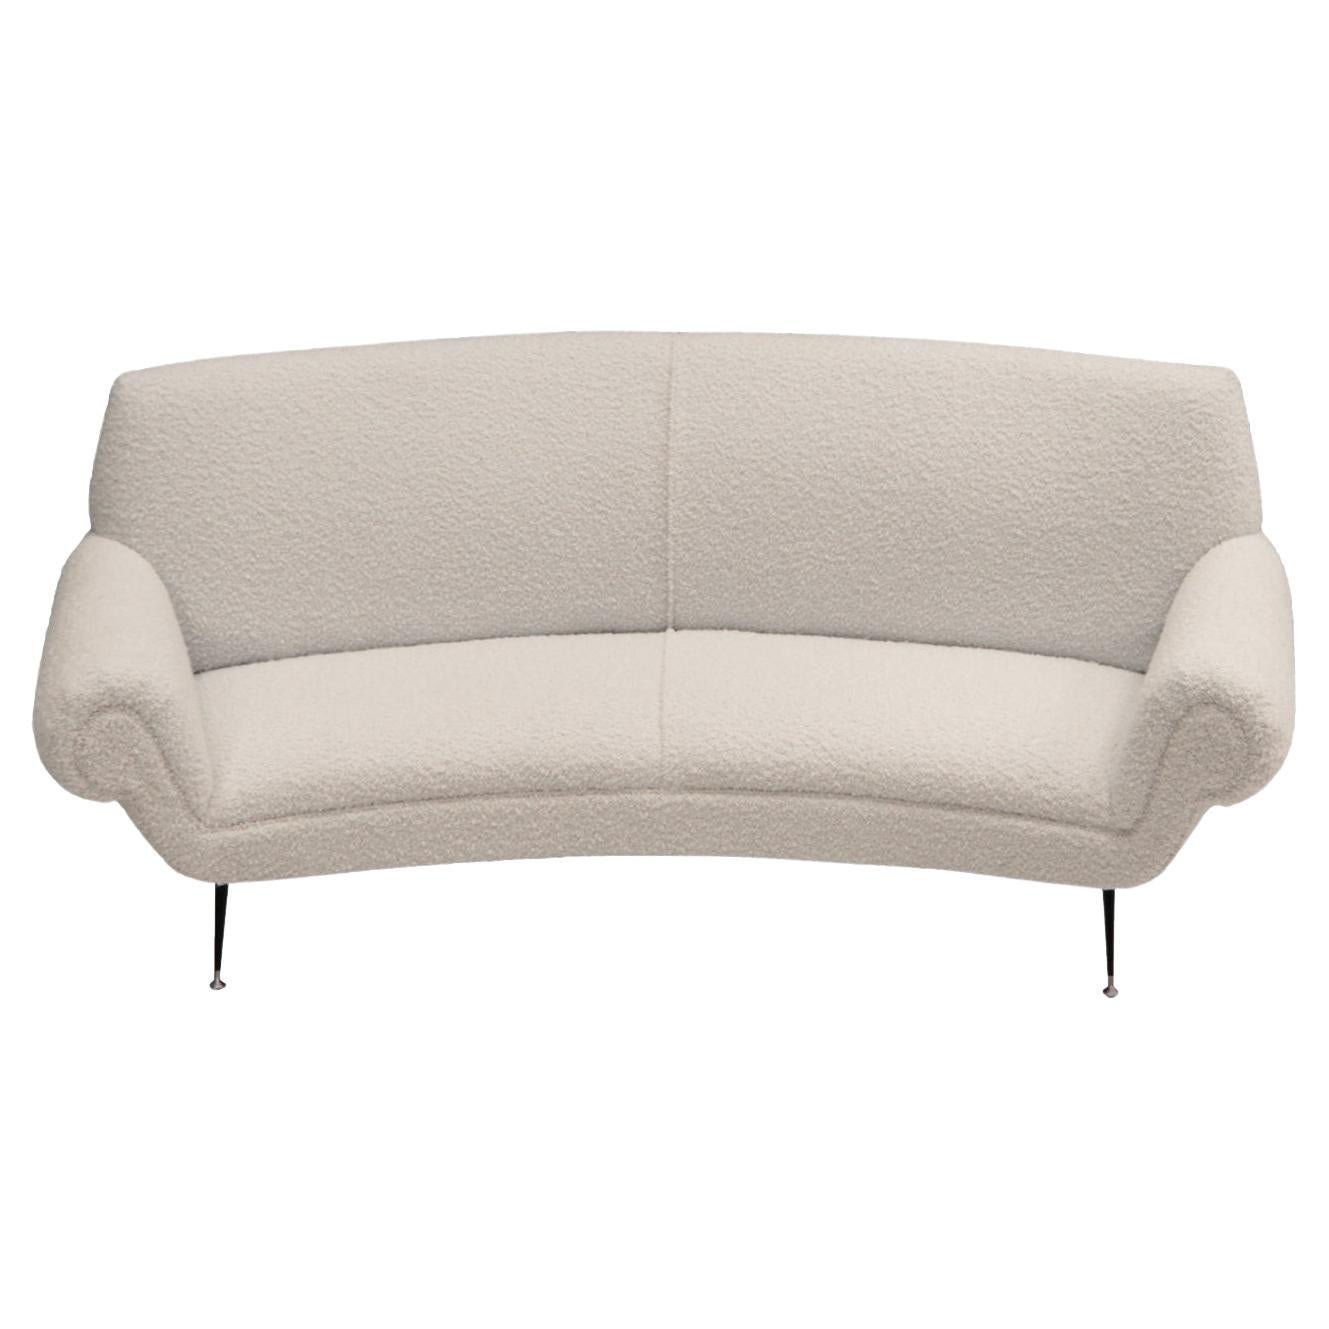 Mid-Century White Boucle Curved Sofa with Six Legs by Gigi Radice for Minotti For Sale